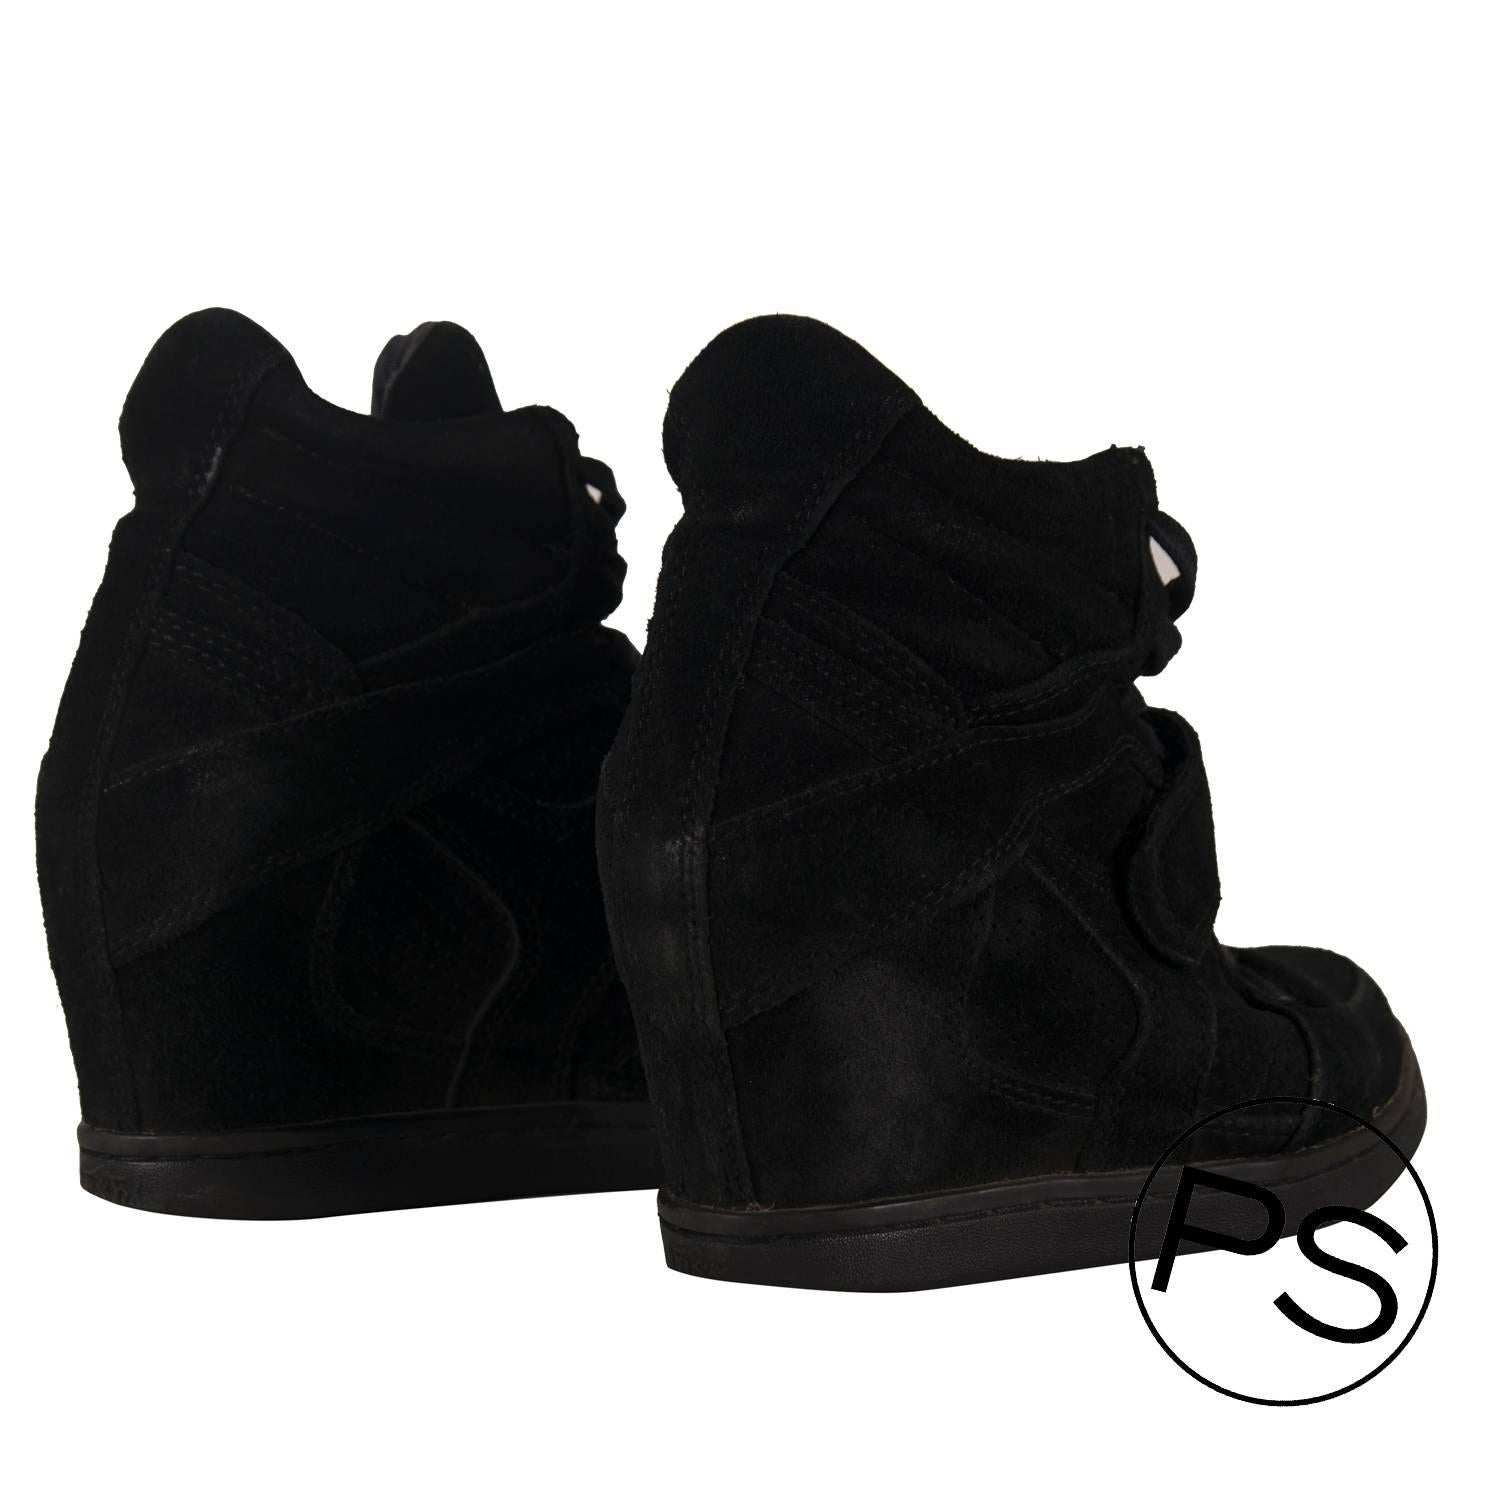 Ash Wedge shoes 38 Suede Black 2012.

Pre-owned and used.

Bought it in Ash store in 2012.

Composition; Suede.

Model; Wedge shoes.

Color; Black.

Size: 38.

-Shipment and Insurance, 100% Safe.

-Secure payment to the company.